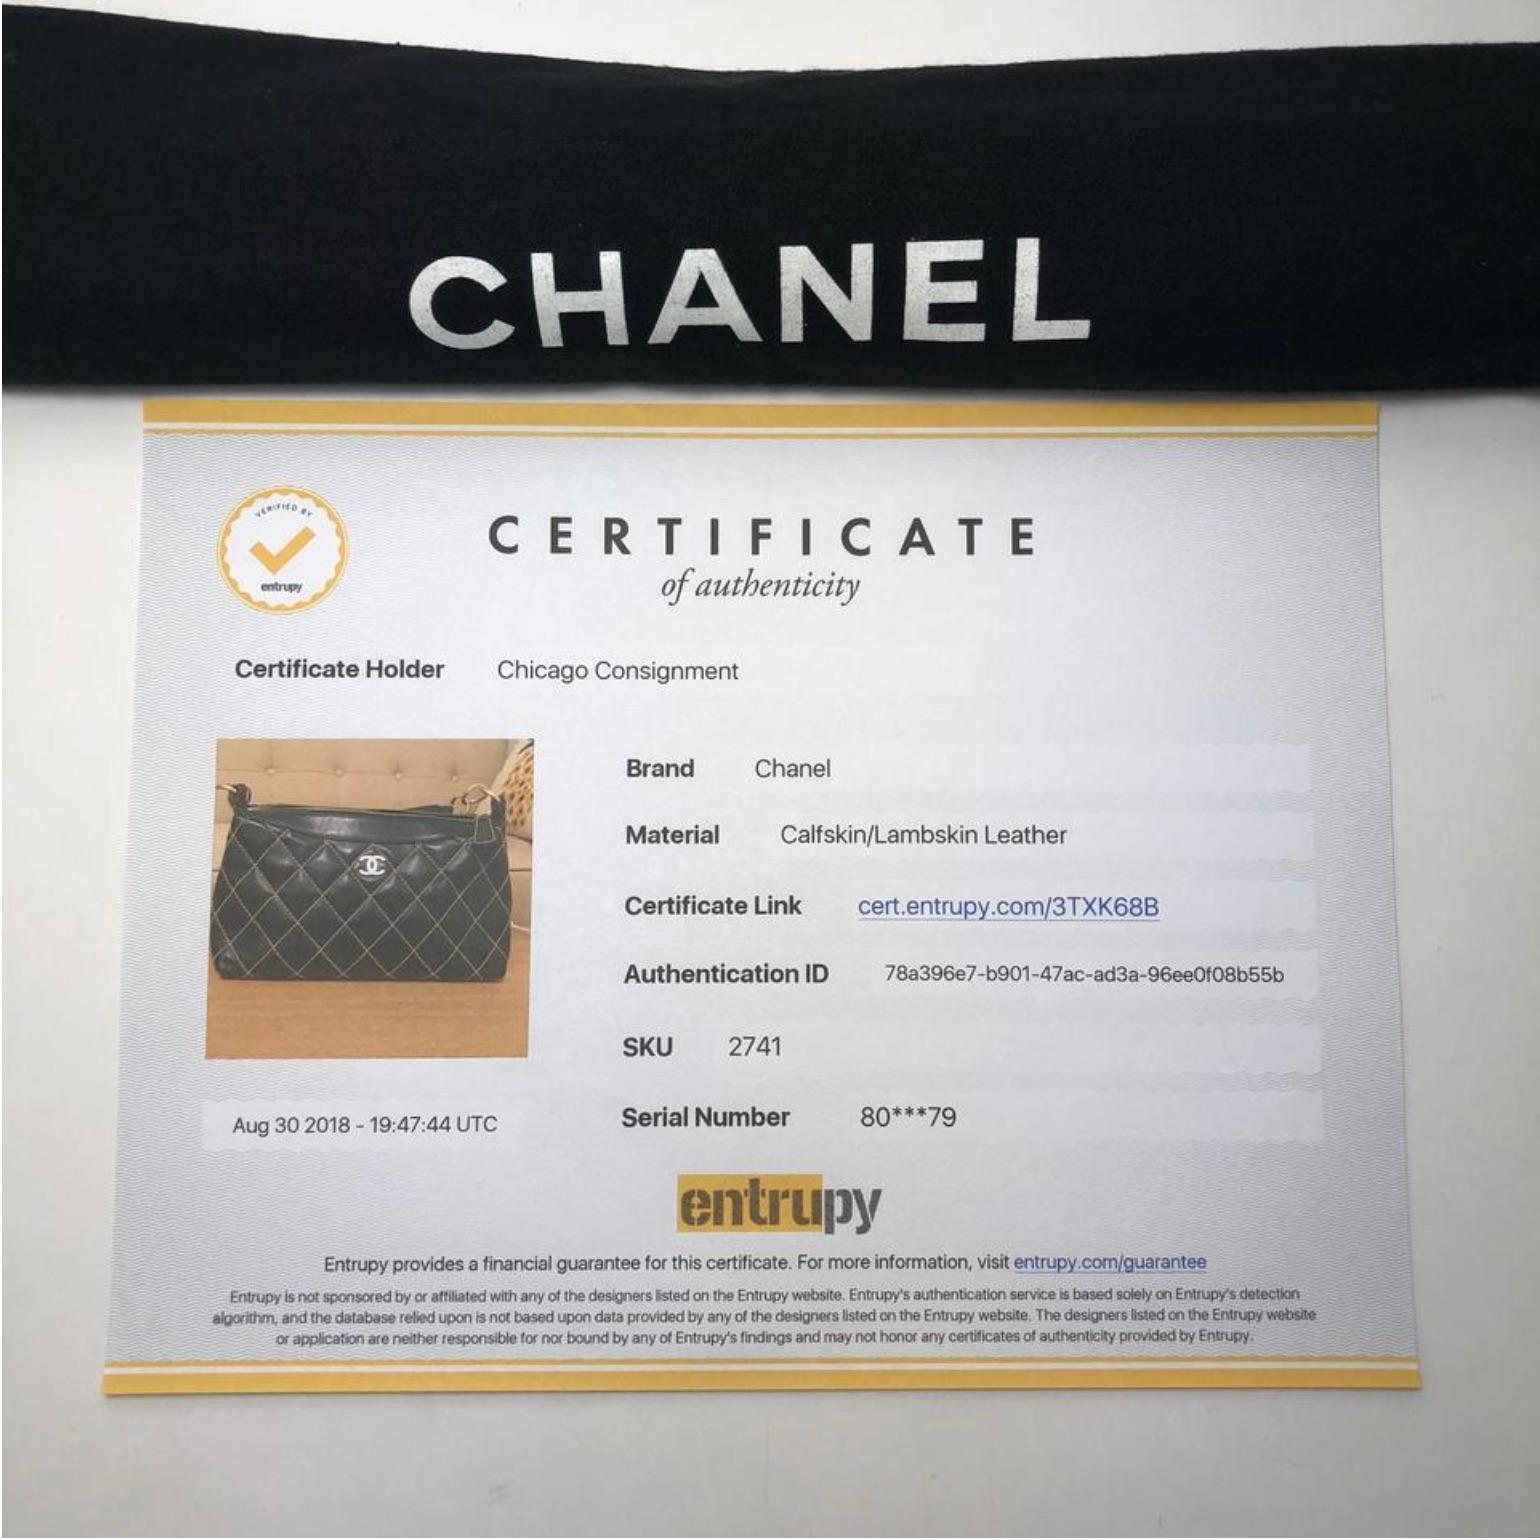 MODEL - Chanel Lambskin Leather Wild Stitch Large Shoulder with Gold Hardware in Black

CONDITION - Exceptional!  No watermarks, no handle darkening, no dryness.  Bright and shiny hardware with no tarnishing.  No rips, holes, tears, stains or odors.